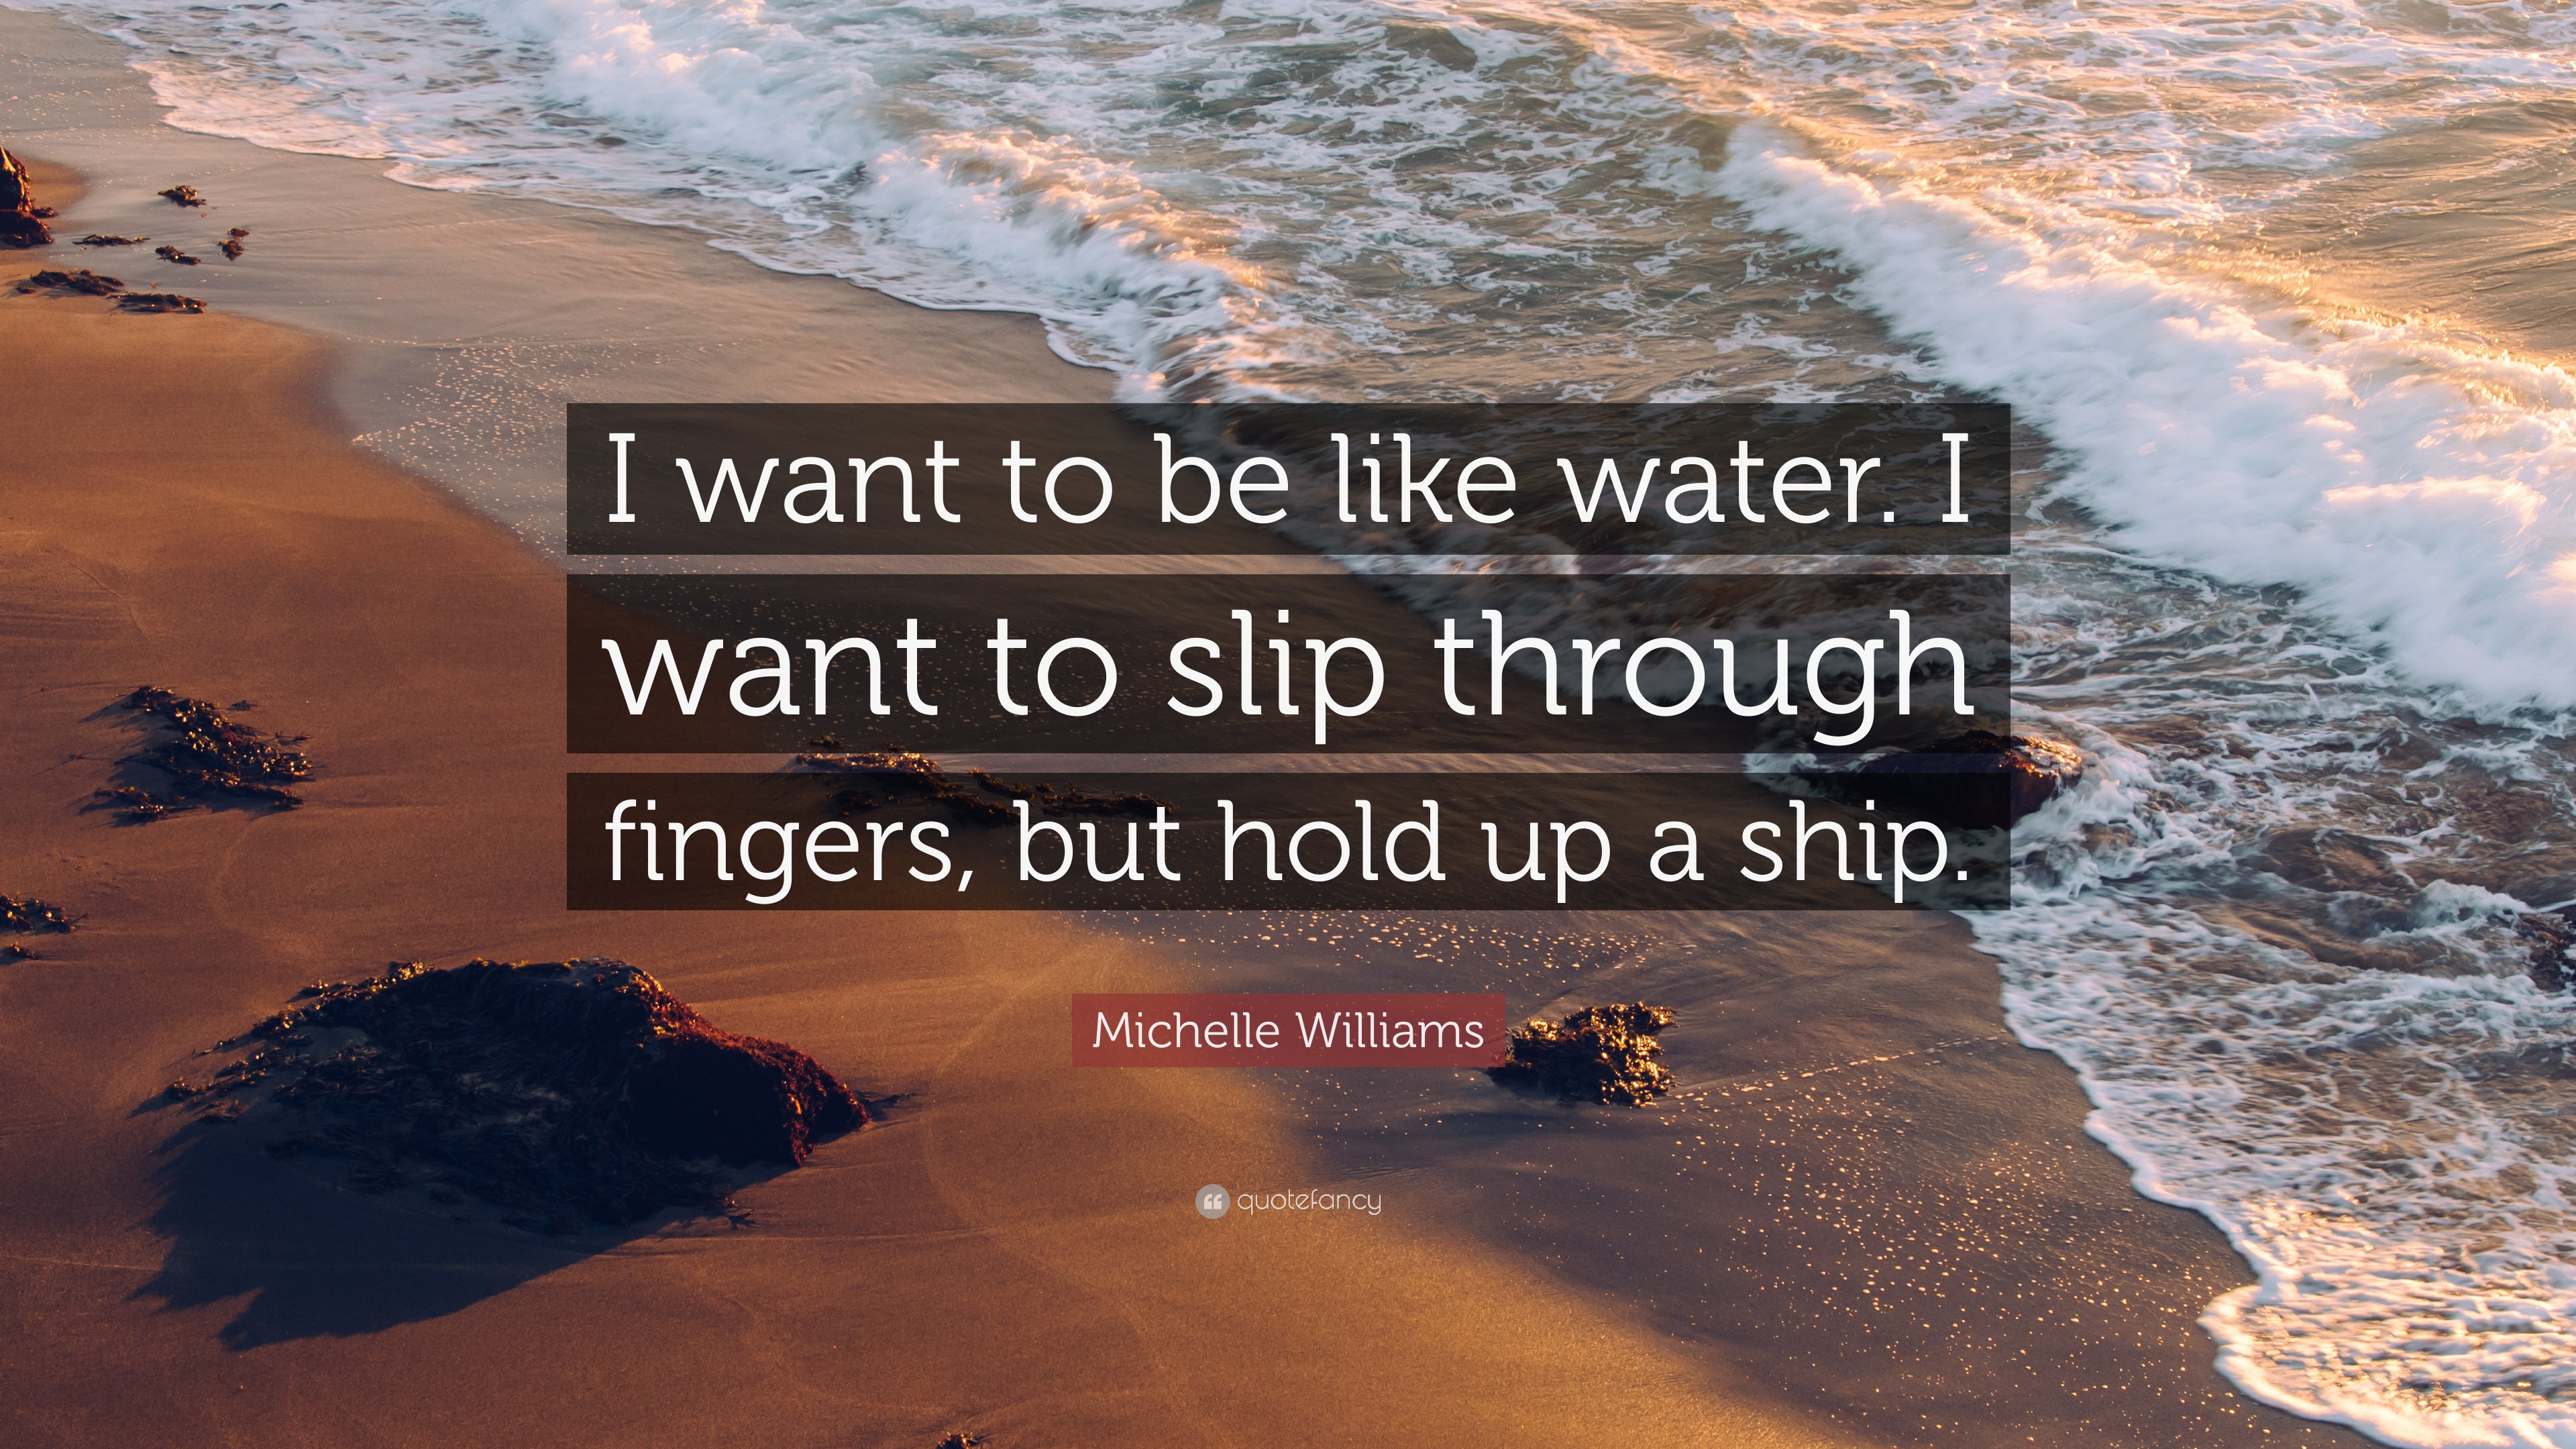 Michelle Williams Quote I Want To Be Like Water I Want To Slip Through Fingers But Hold Up A Ship 7 Wallpapers Quotefancy